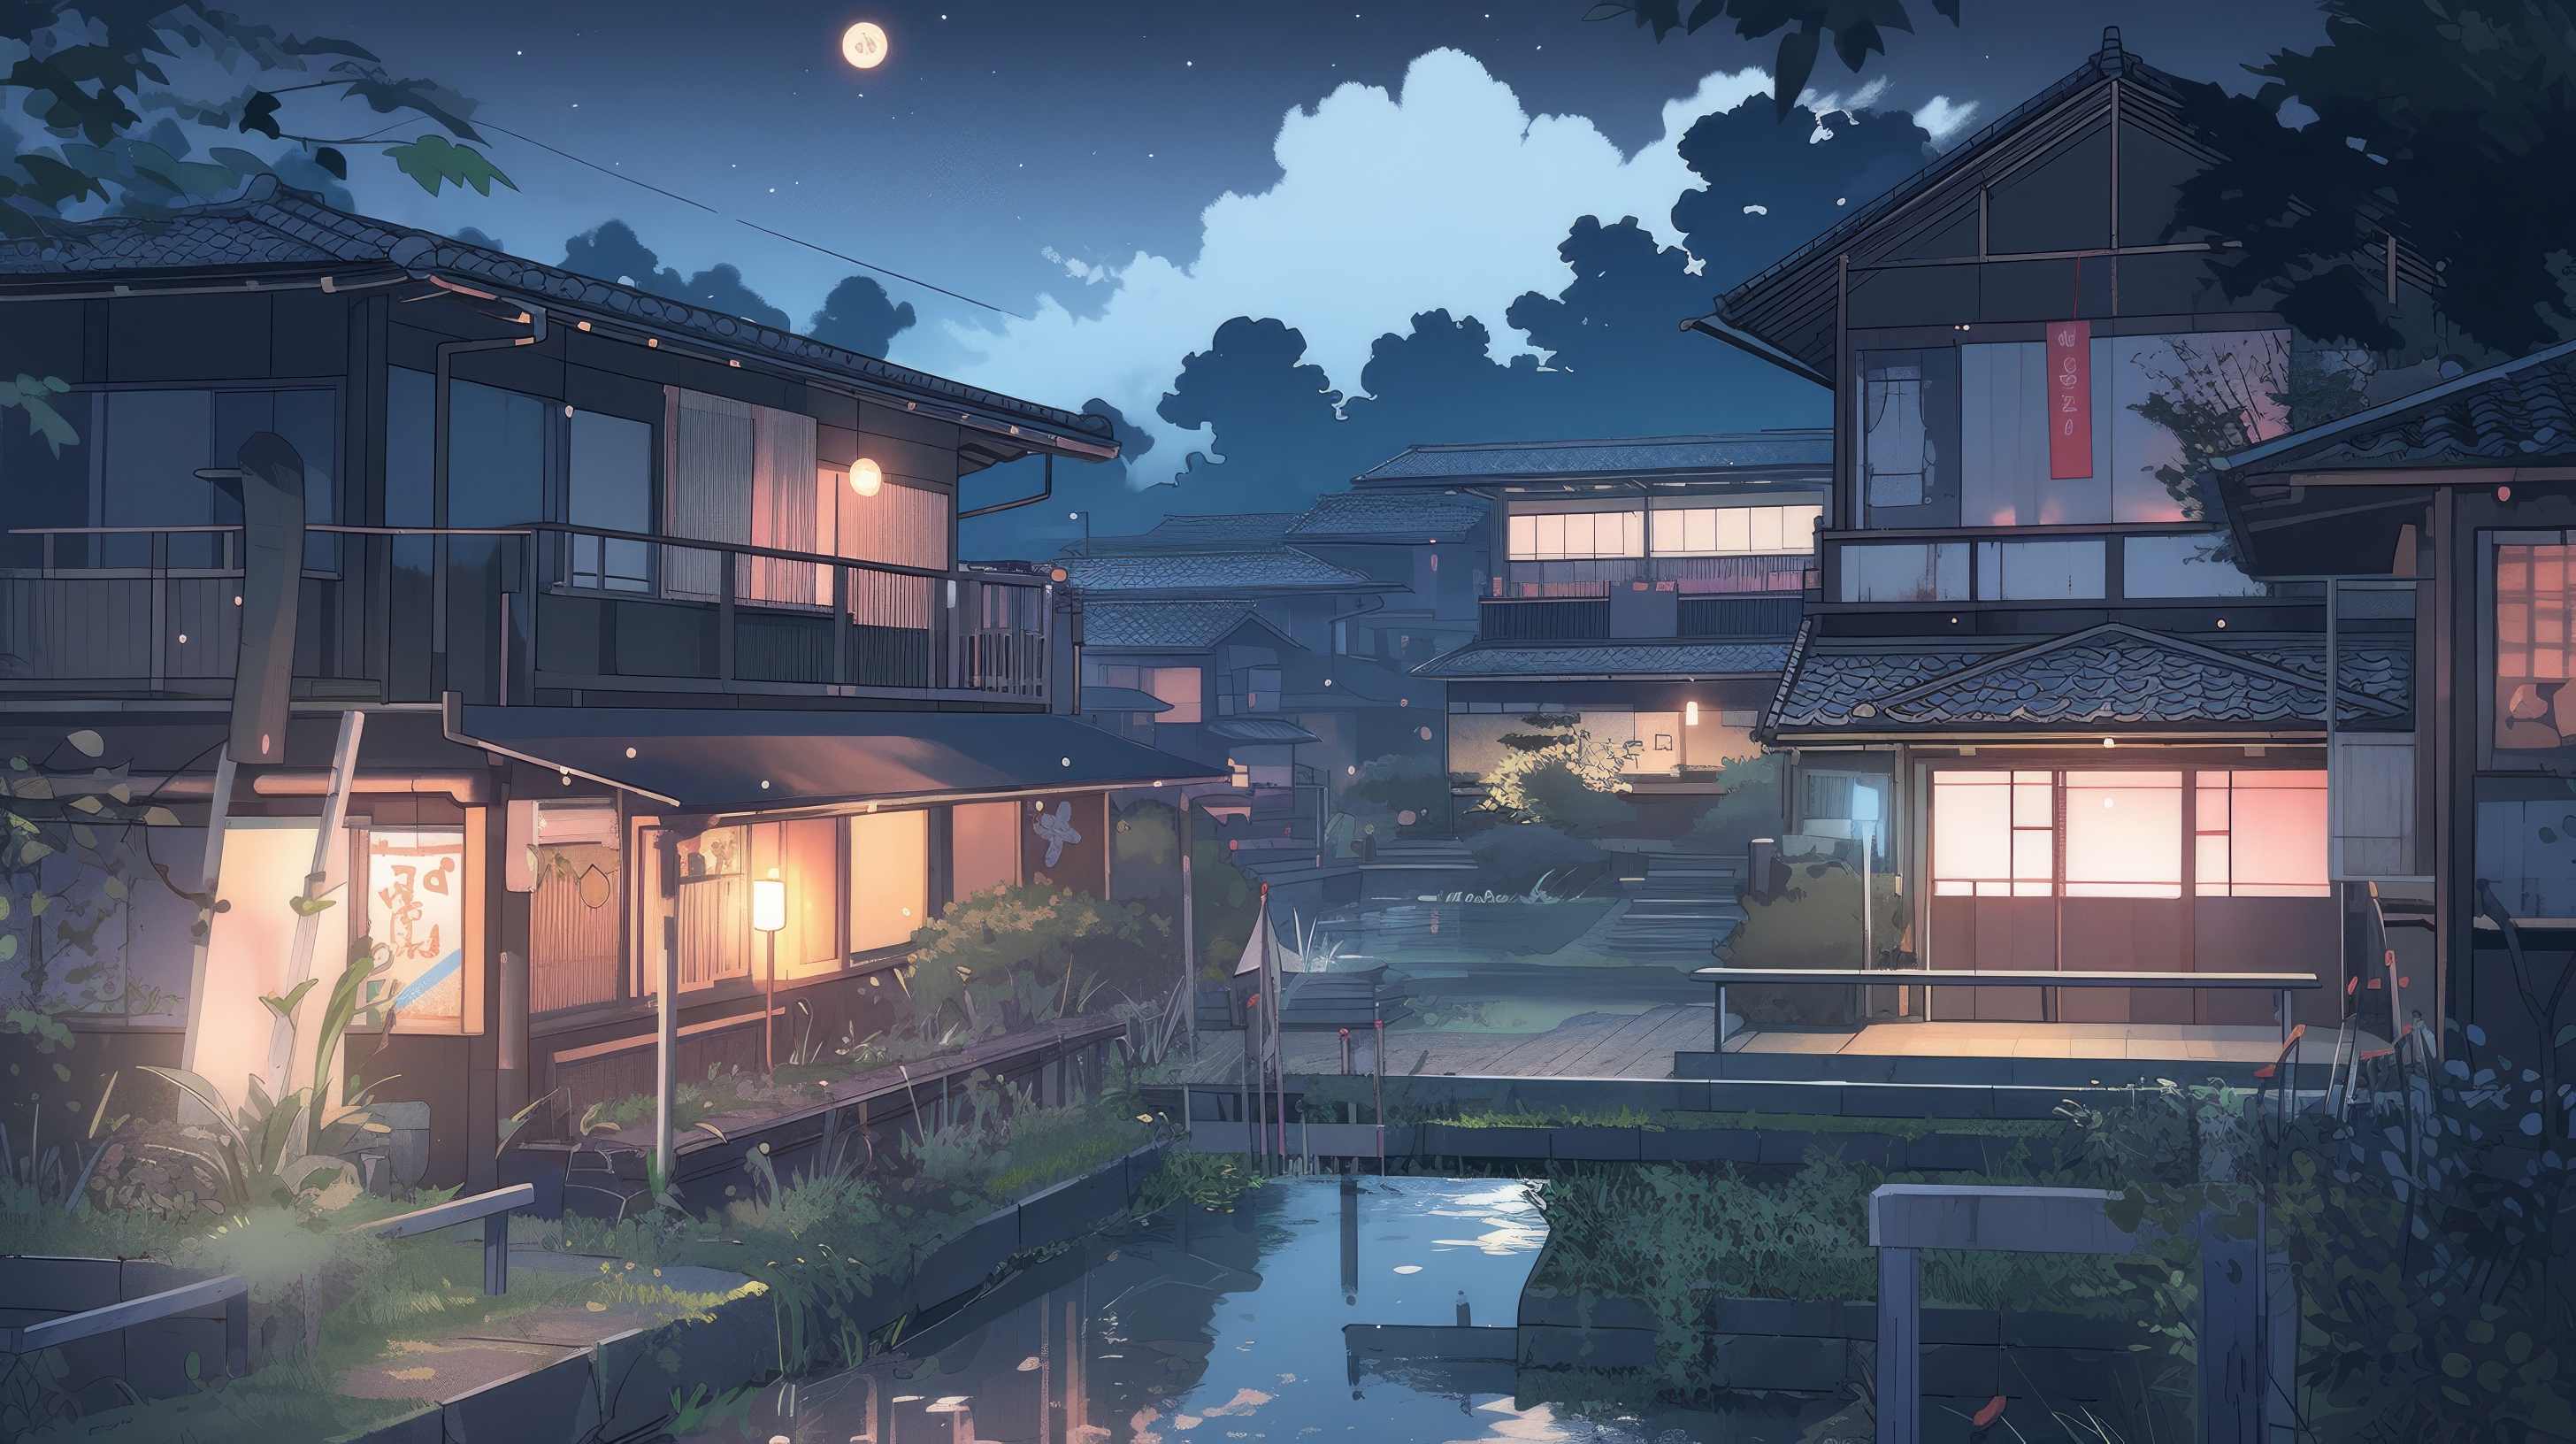 Illustration House Pond Warm Light Blue Hour Water Reflection Building Moon Clouds Leaves Lights 2912x1632